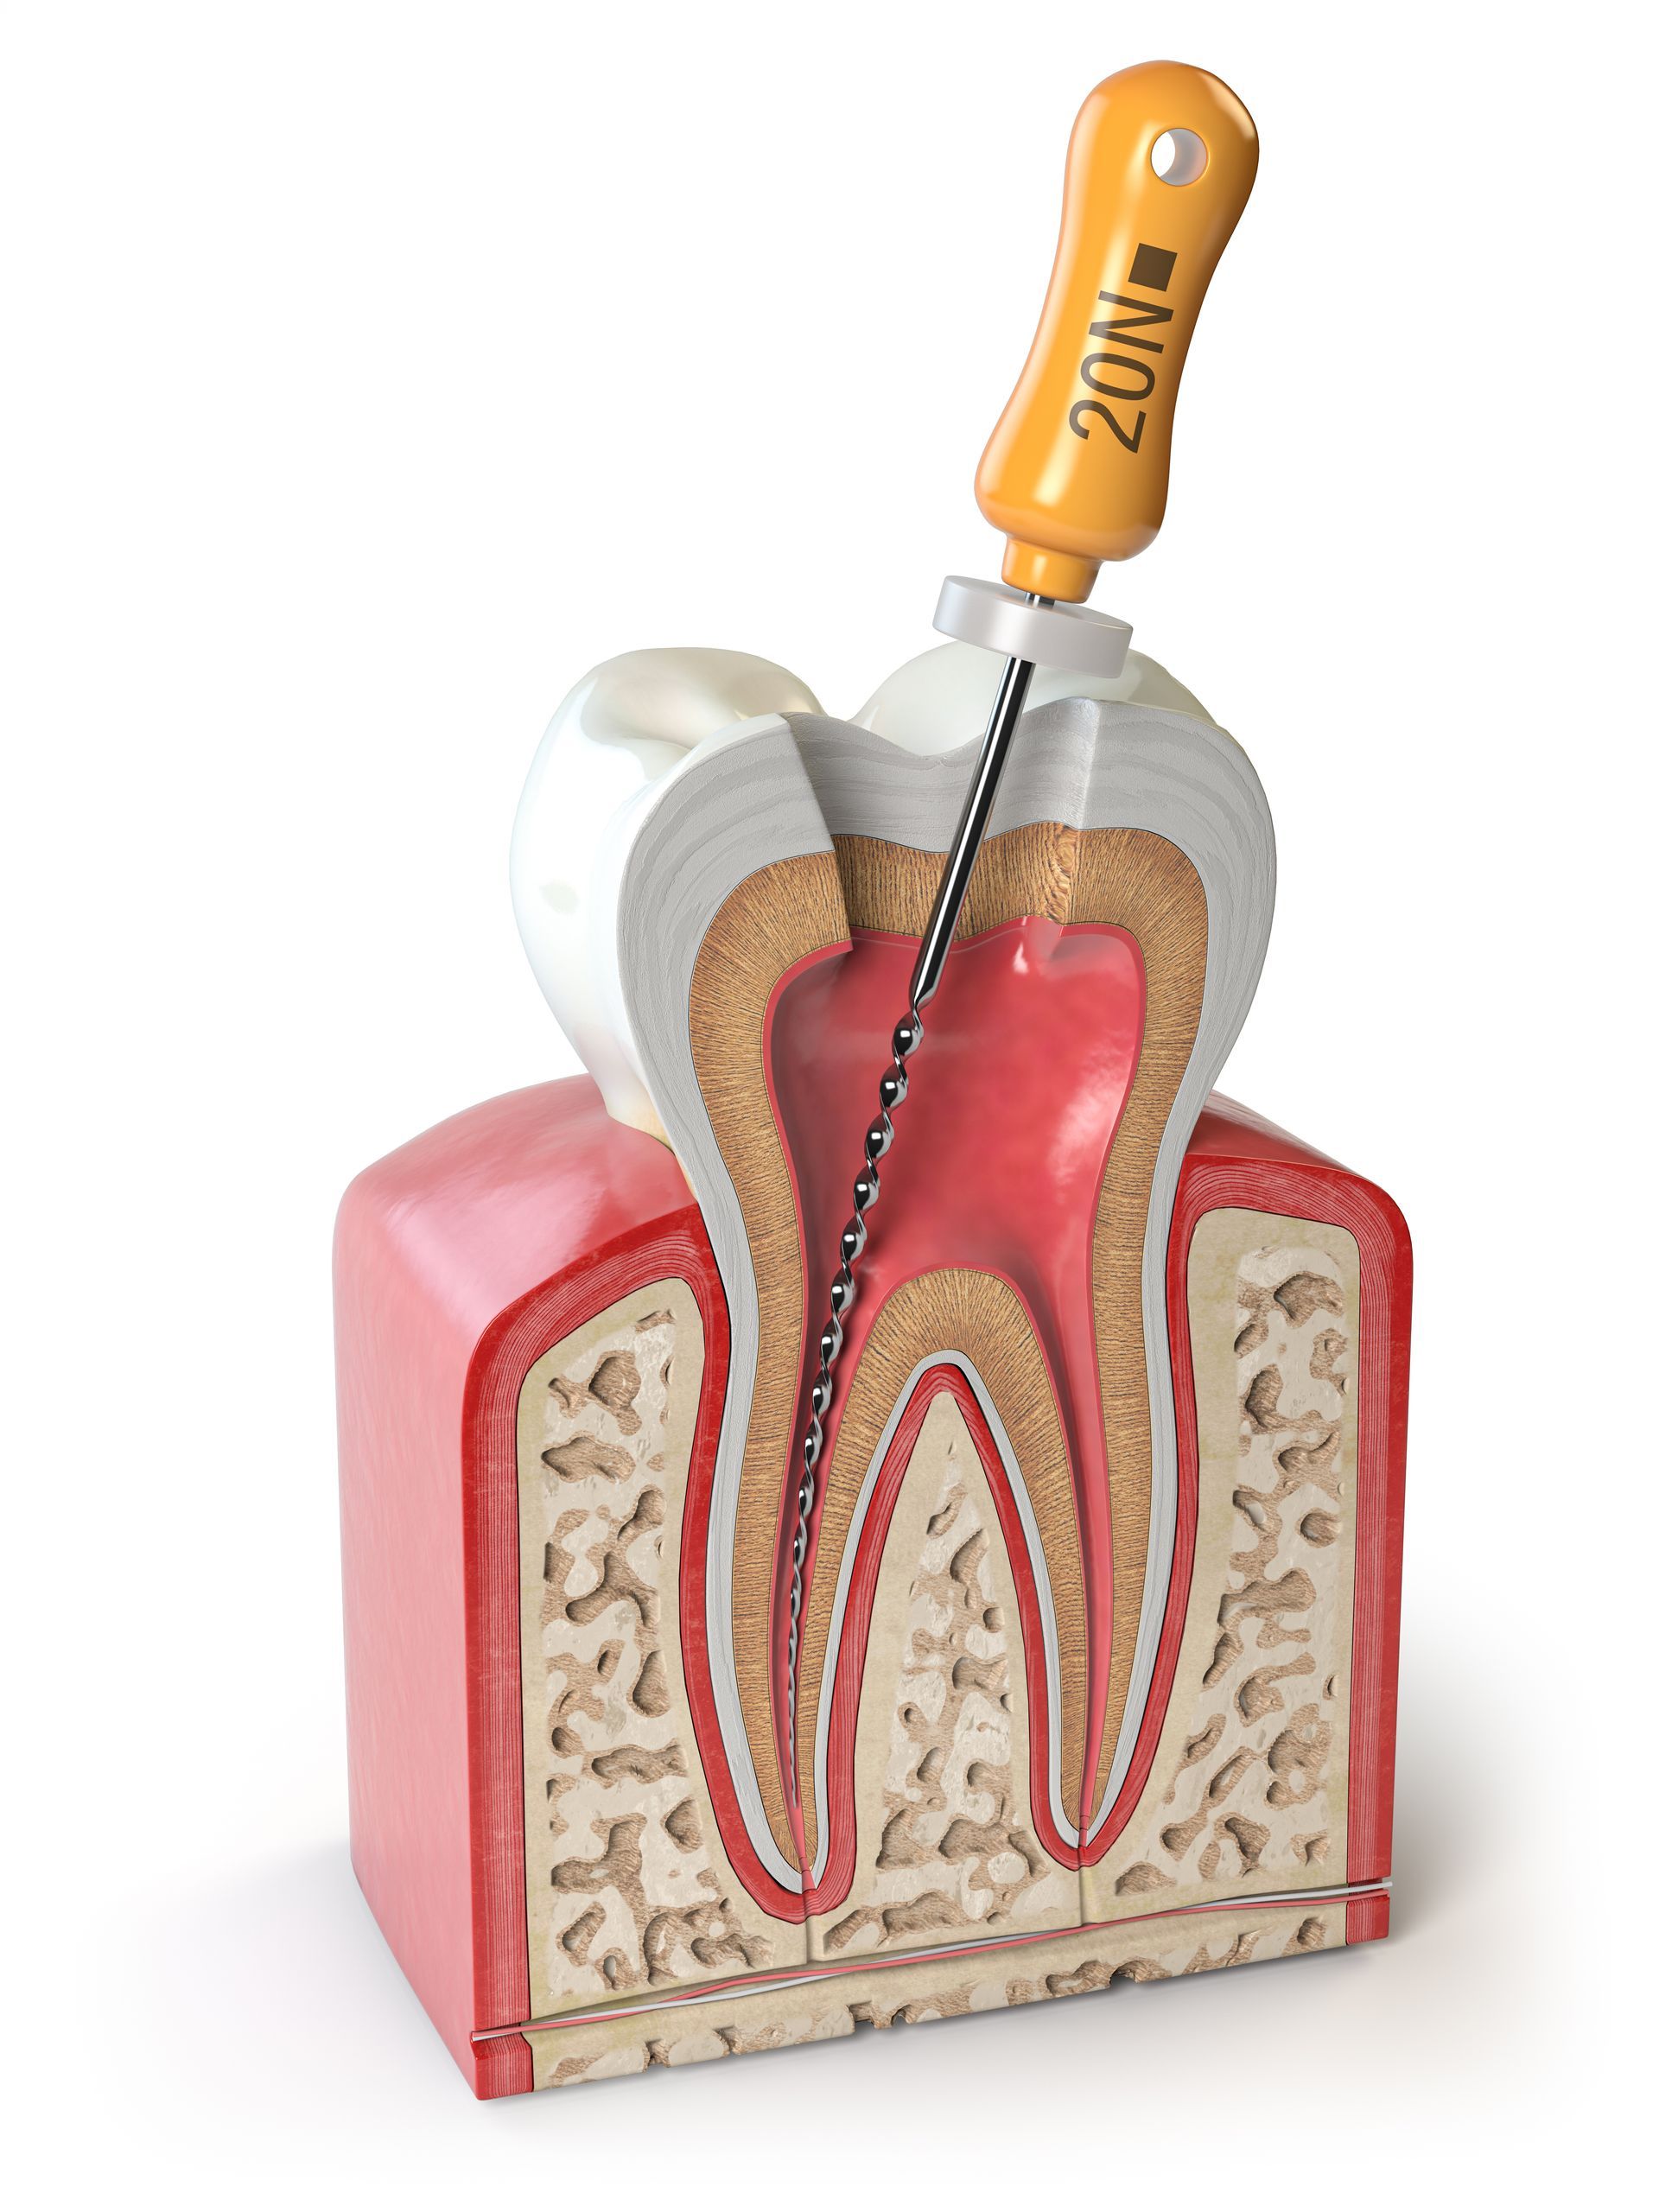 graphic model of single tooth root canal procedure